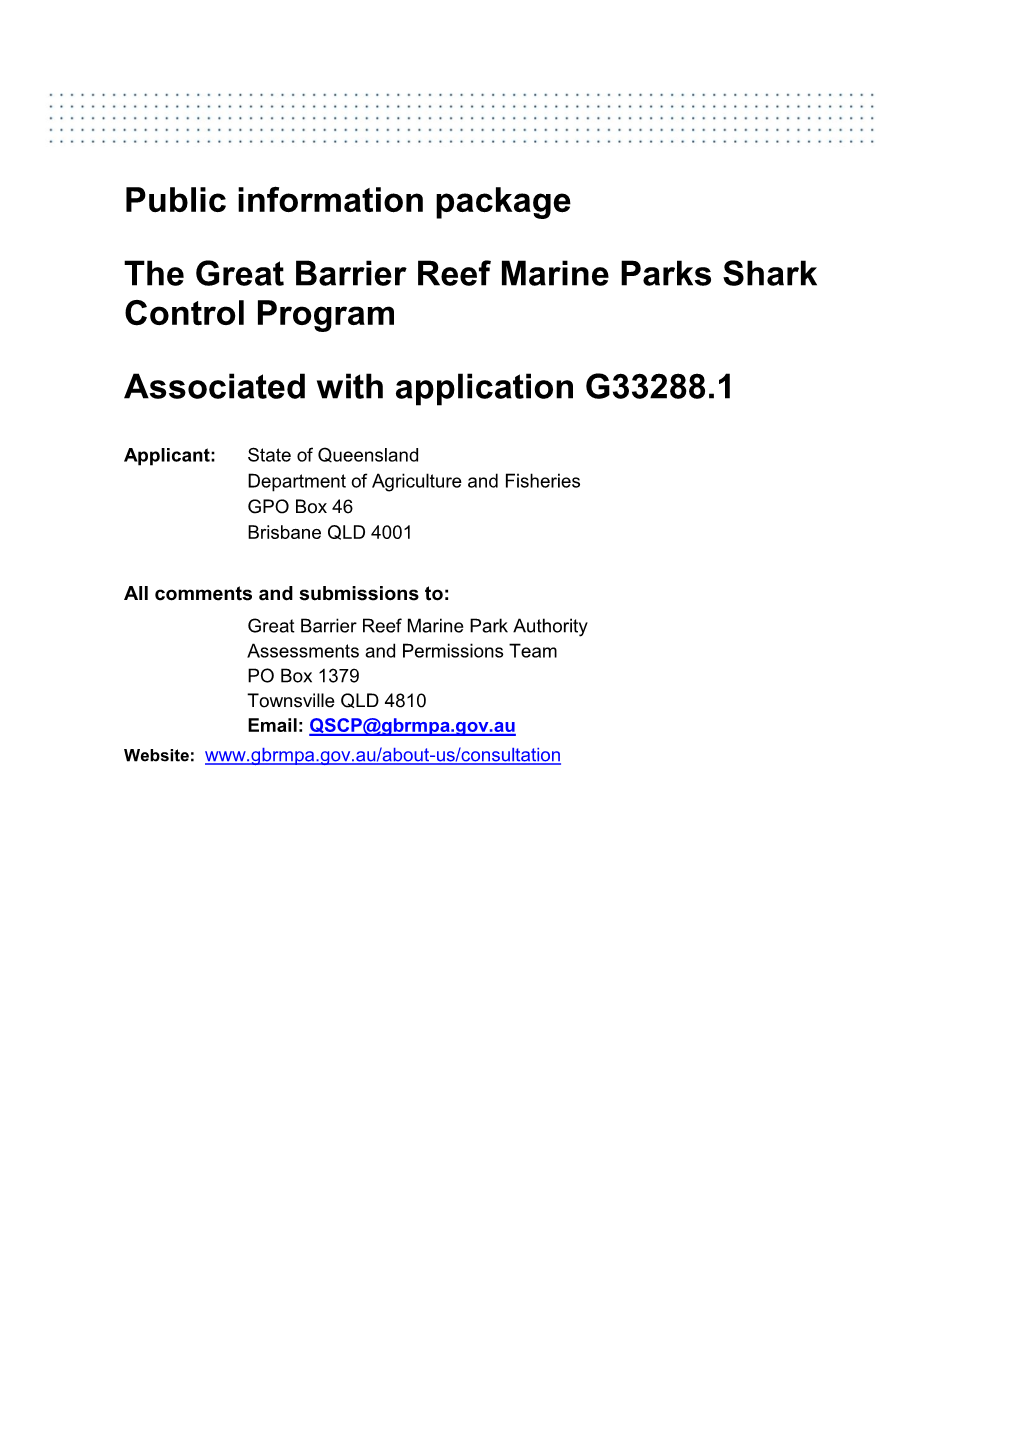 The Great Barrier Reed Marine Parks Shark Control Program